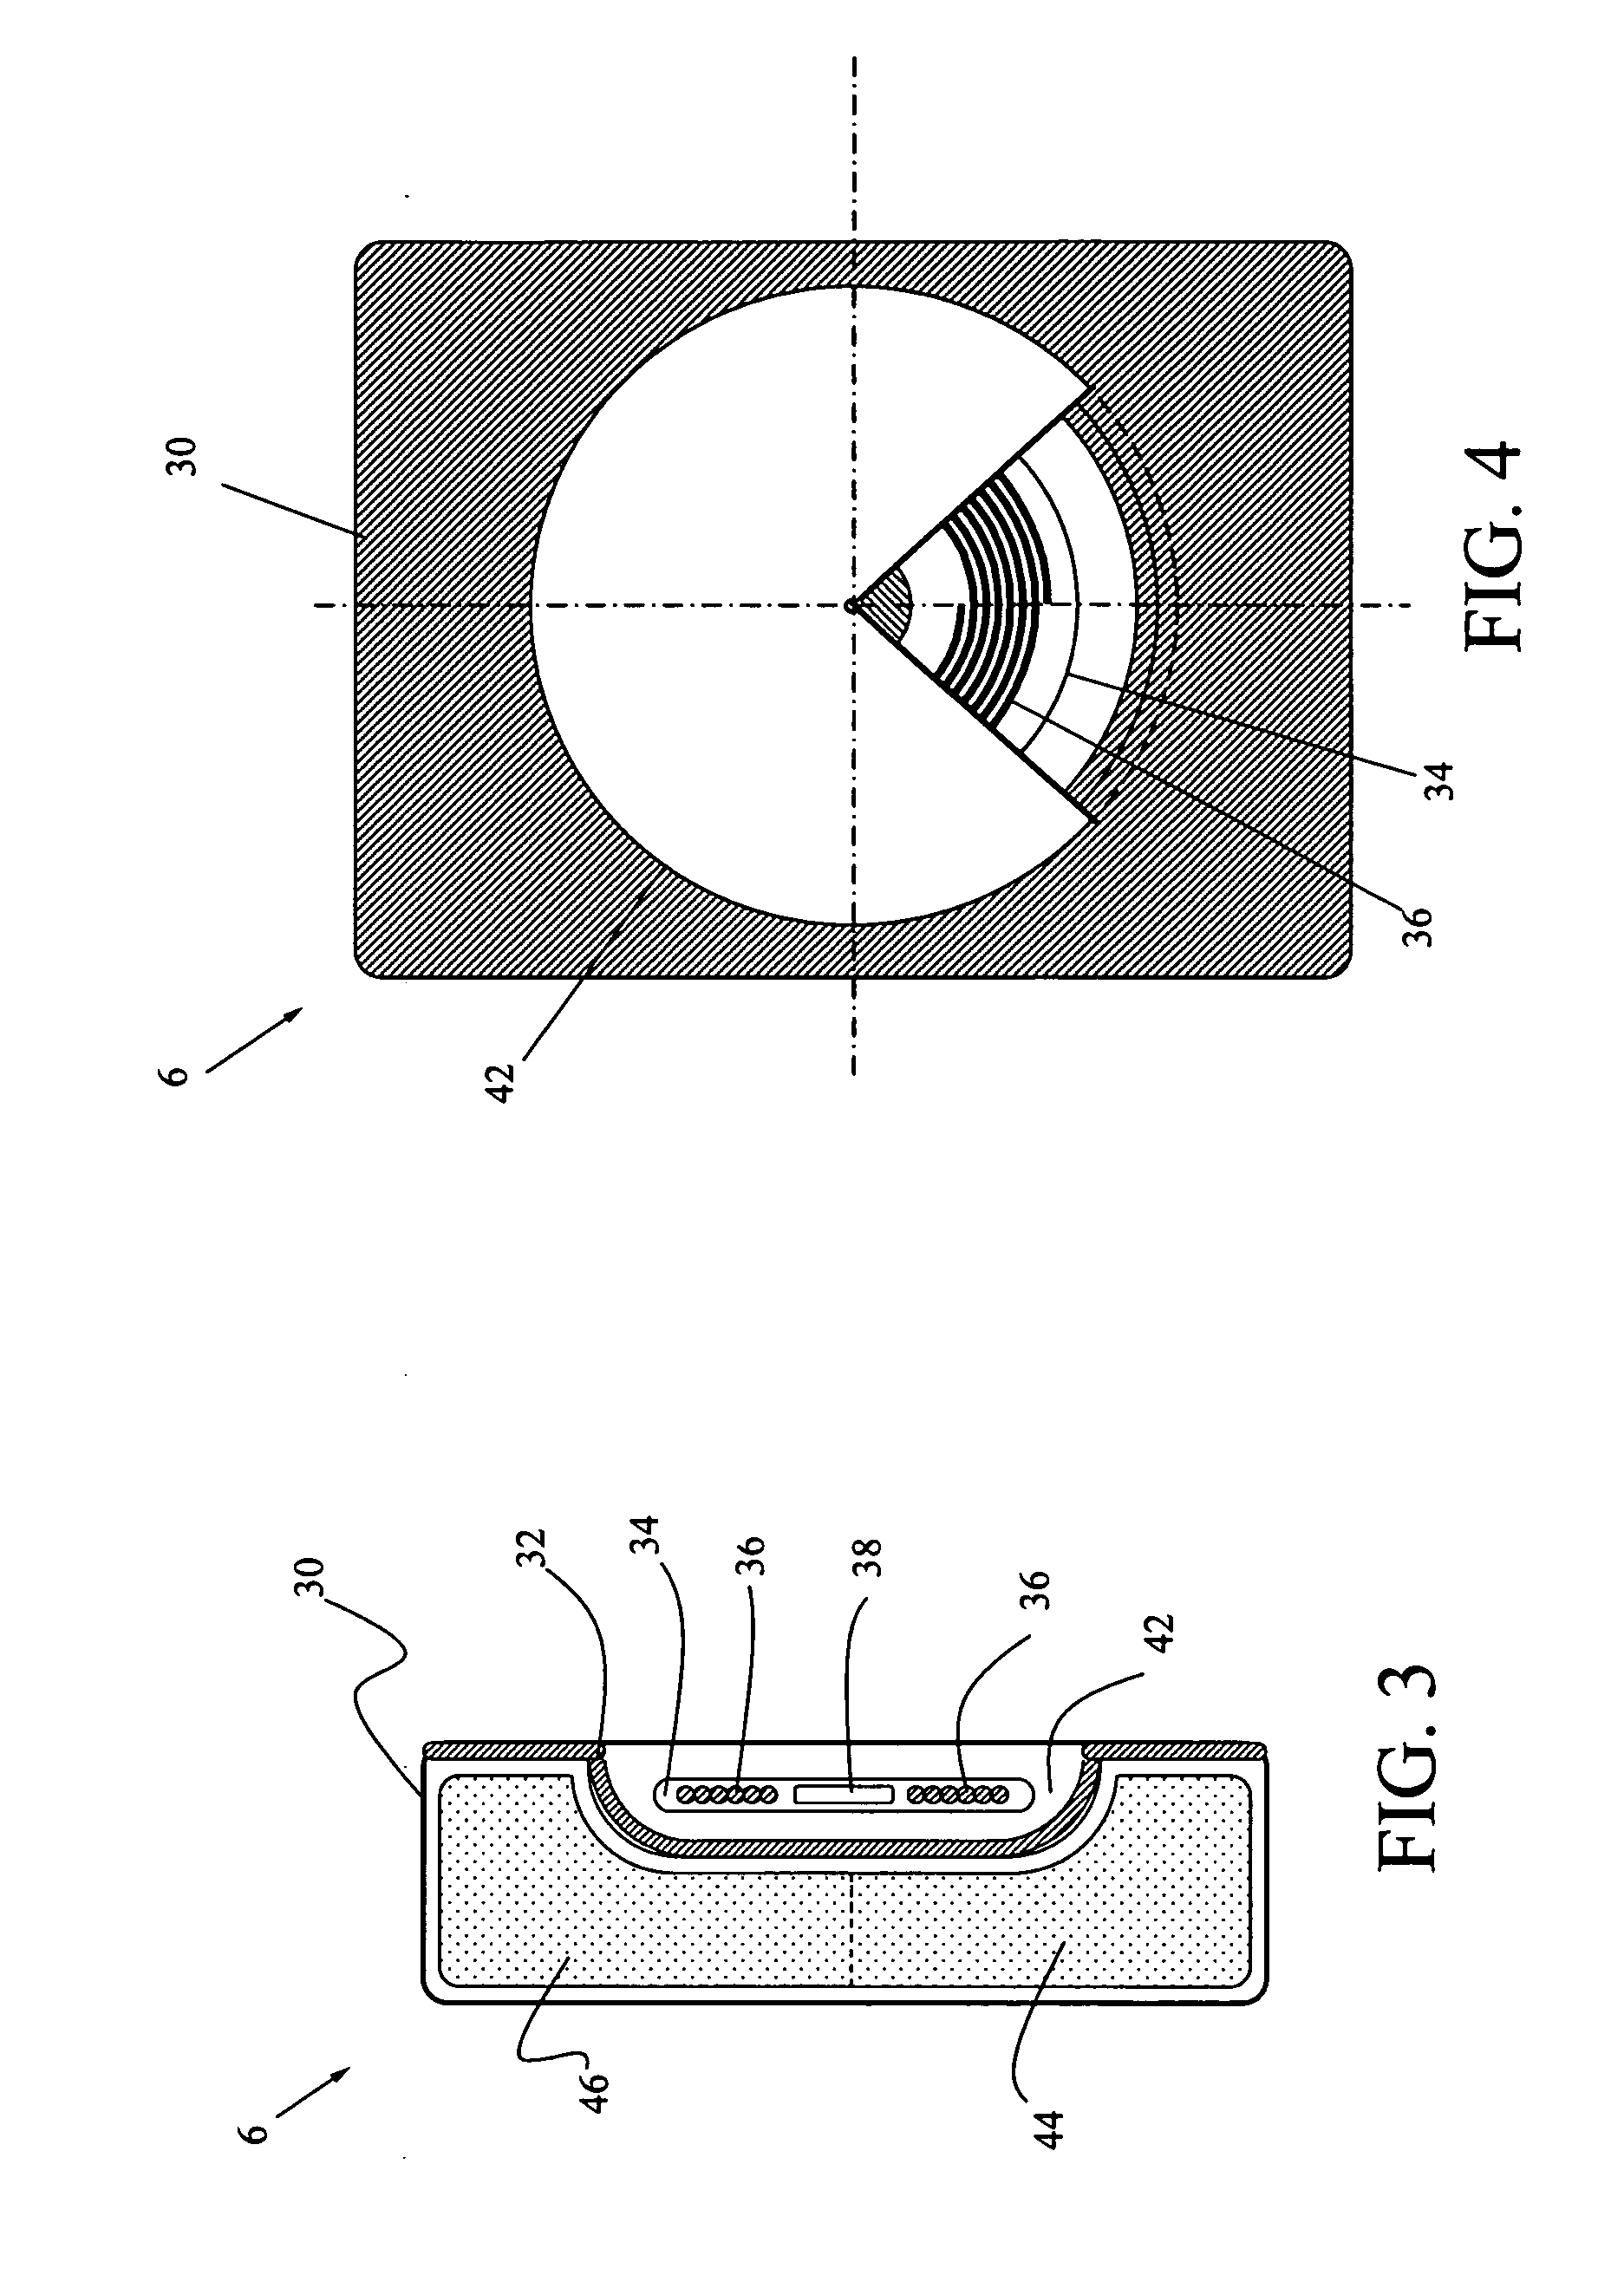 Implantable medical device with contactless power transfer housing